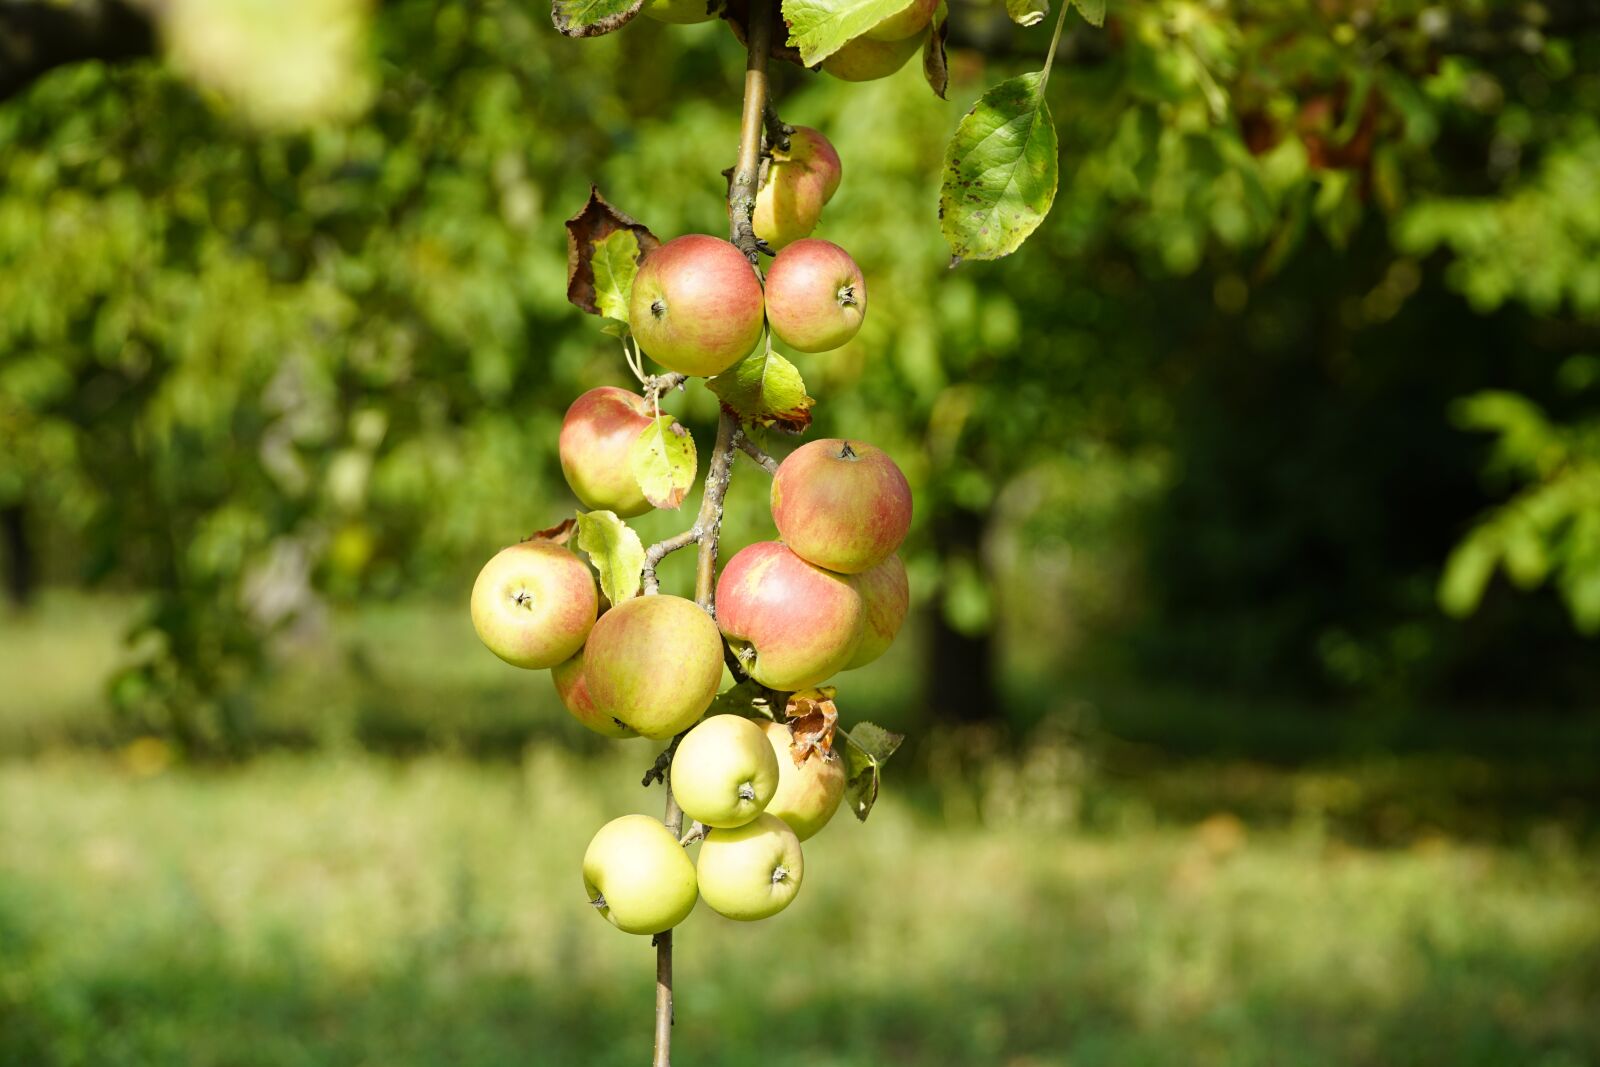 Sony a7R II sample photo. Apples in sunshine, ripe photography